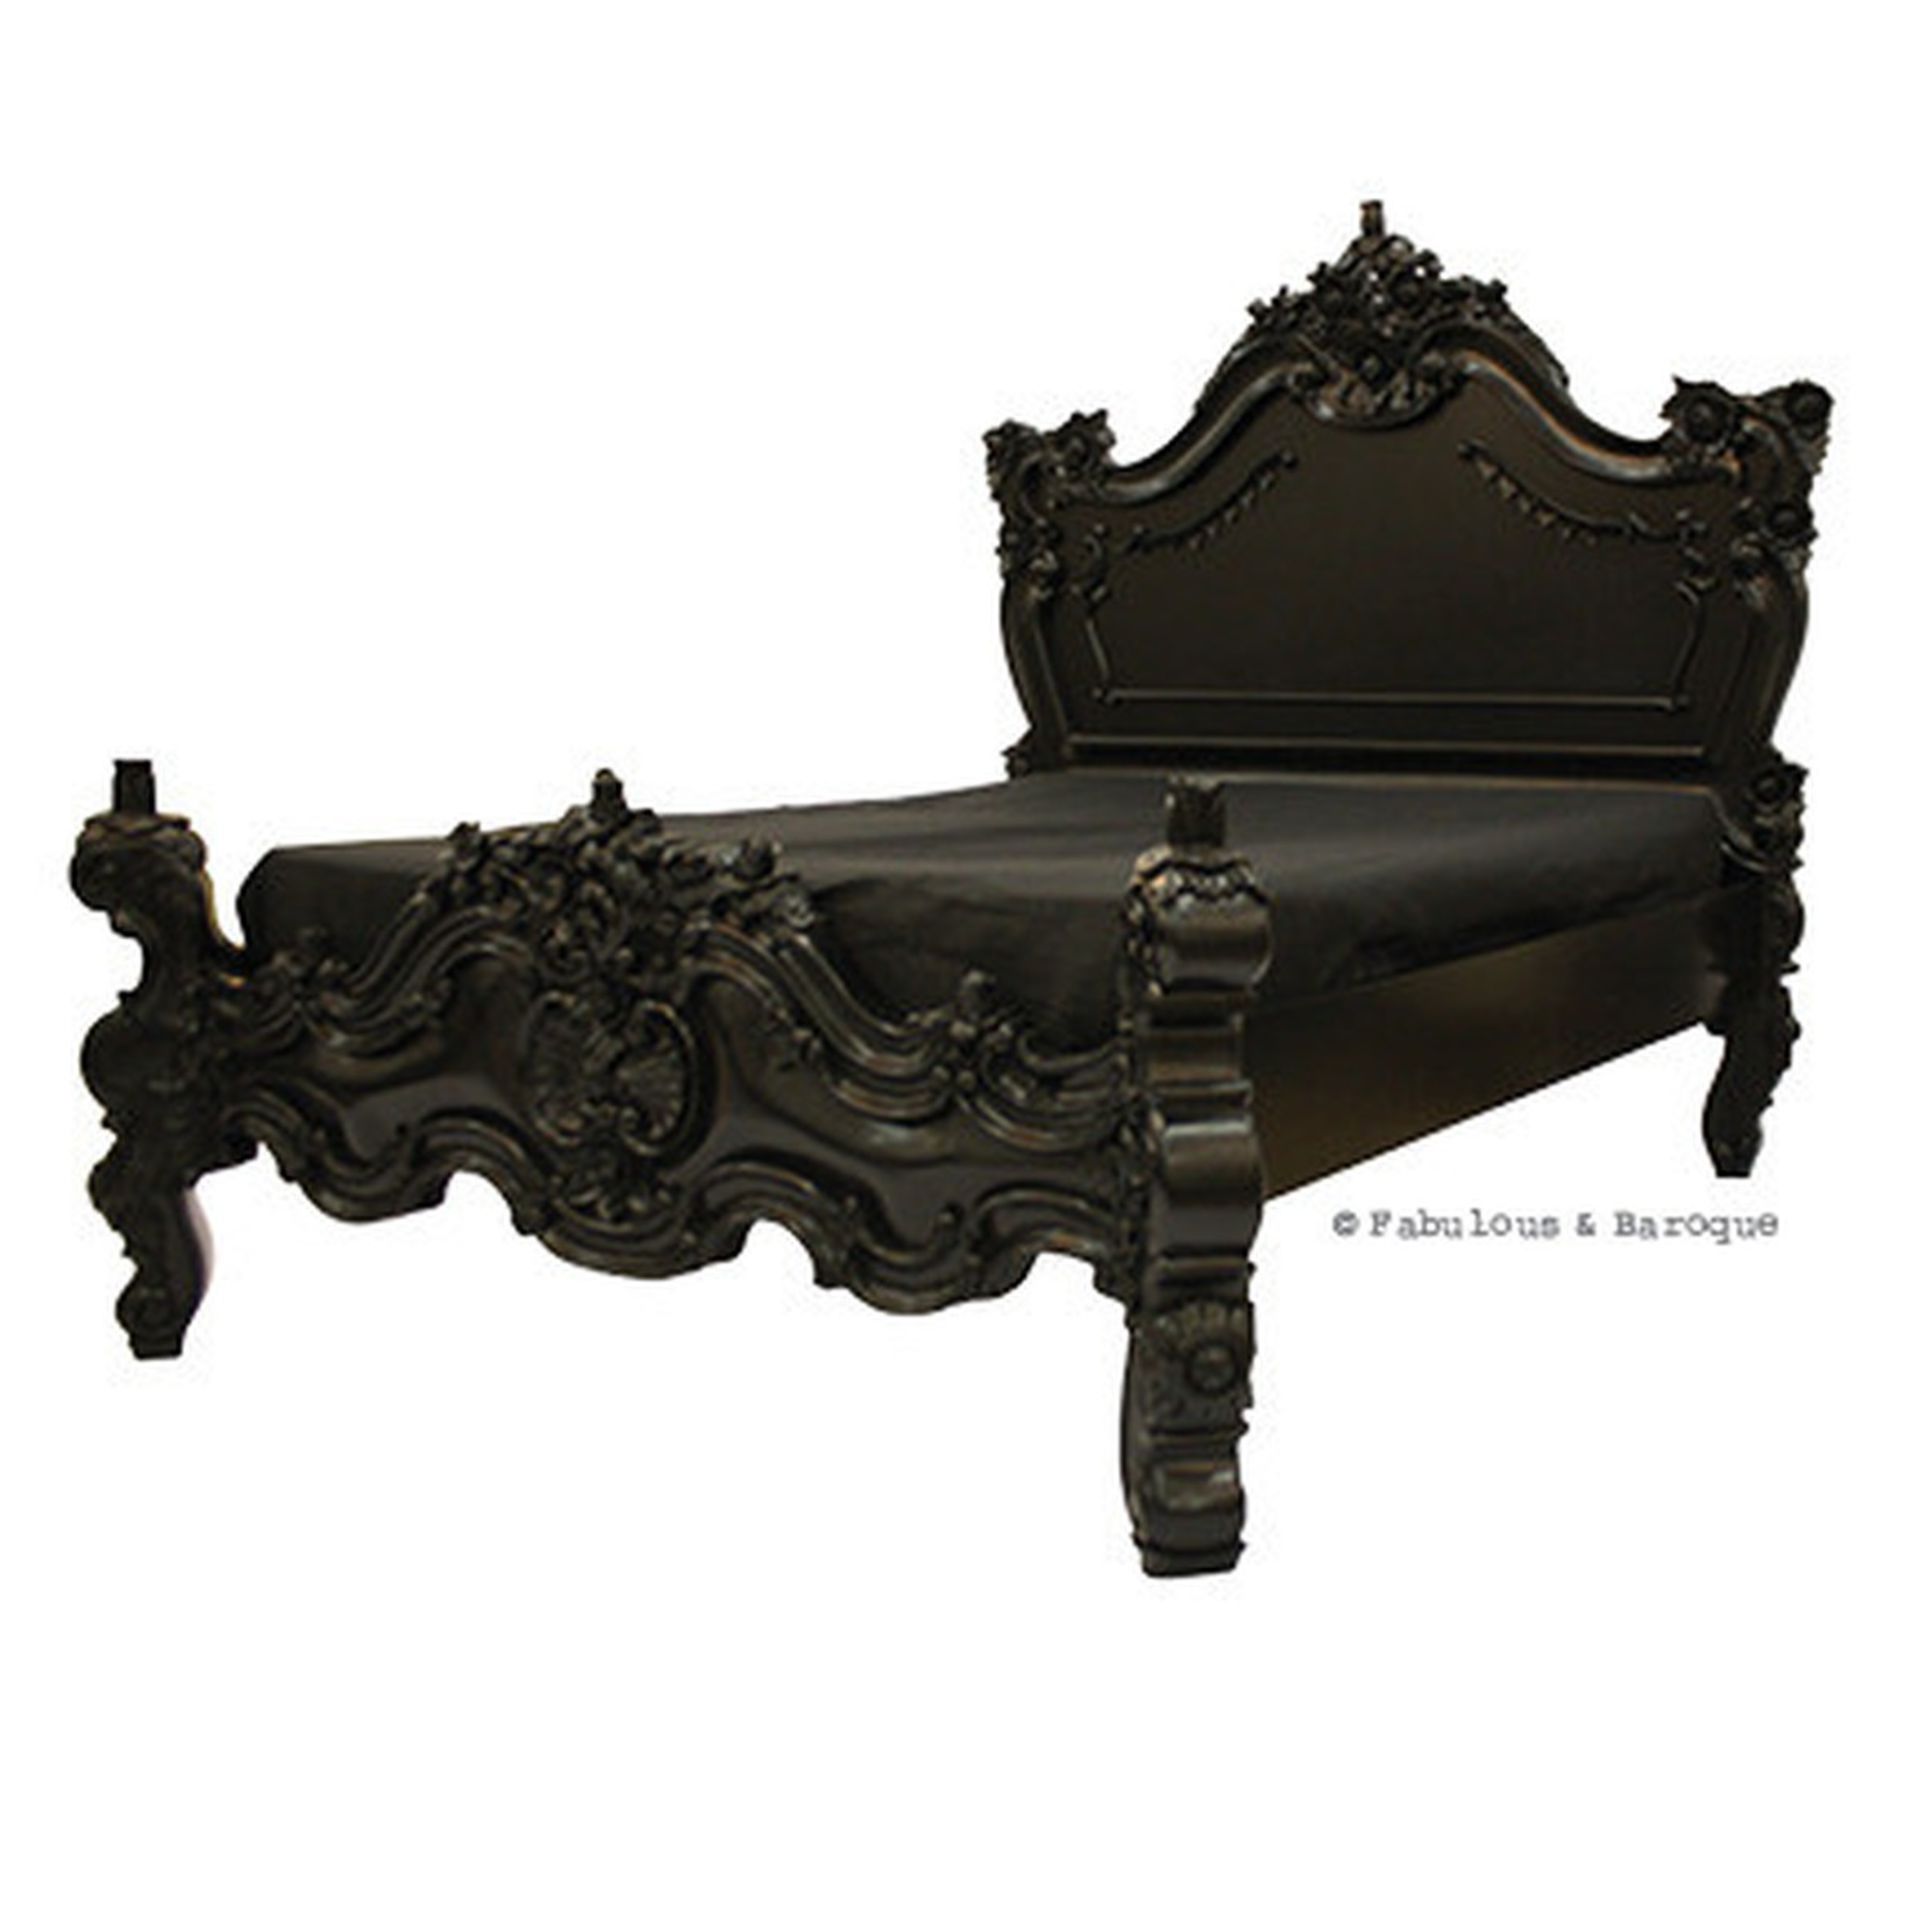 Brand new single Baroque Bed In Black With its intricate and elaborate carvings, this luxurious